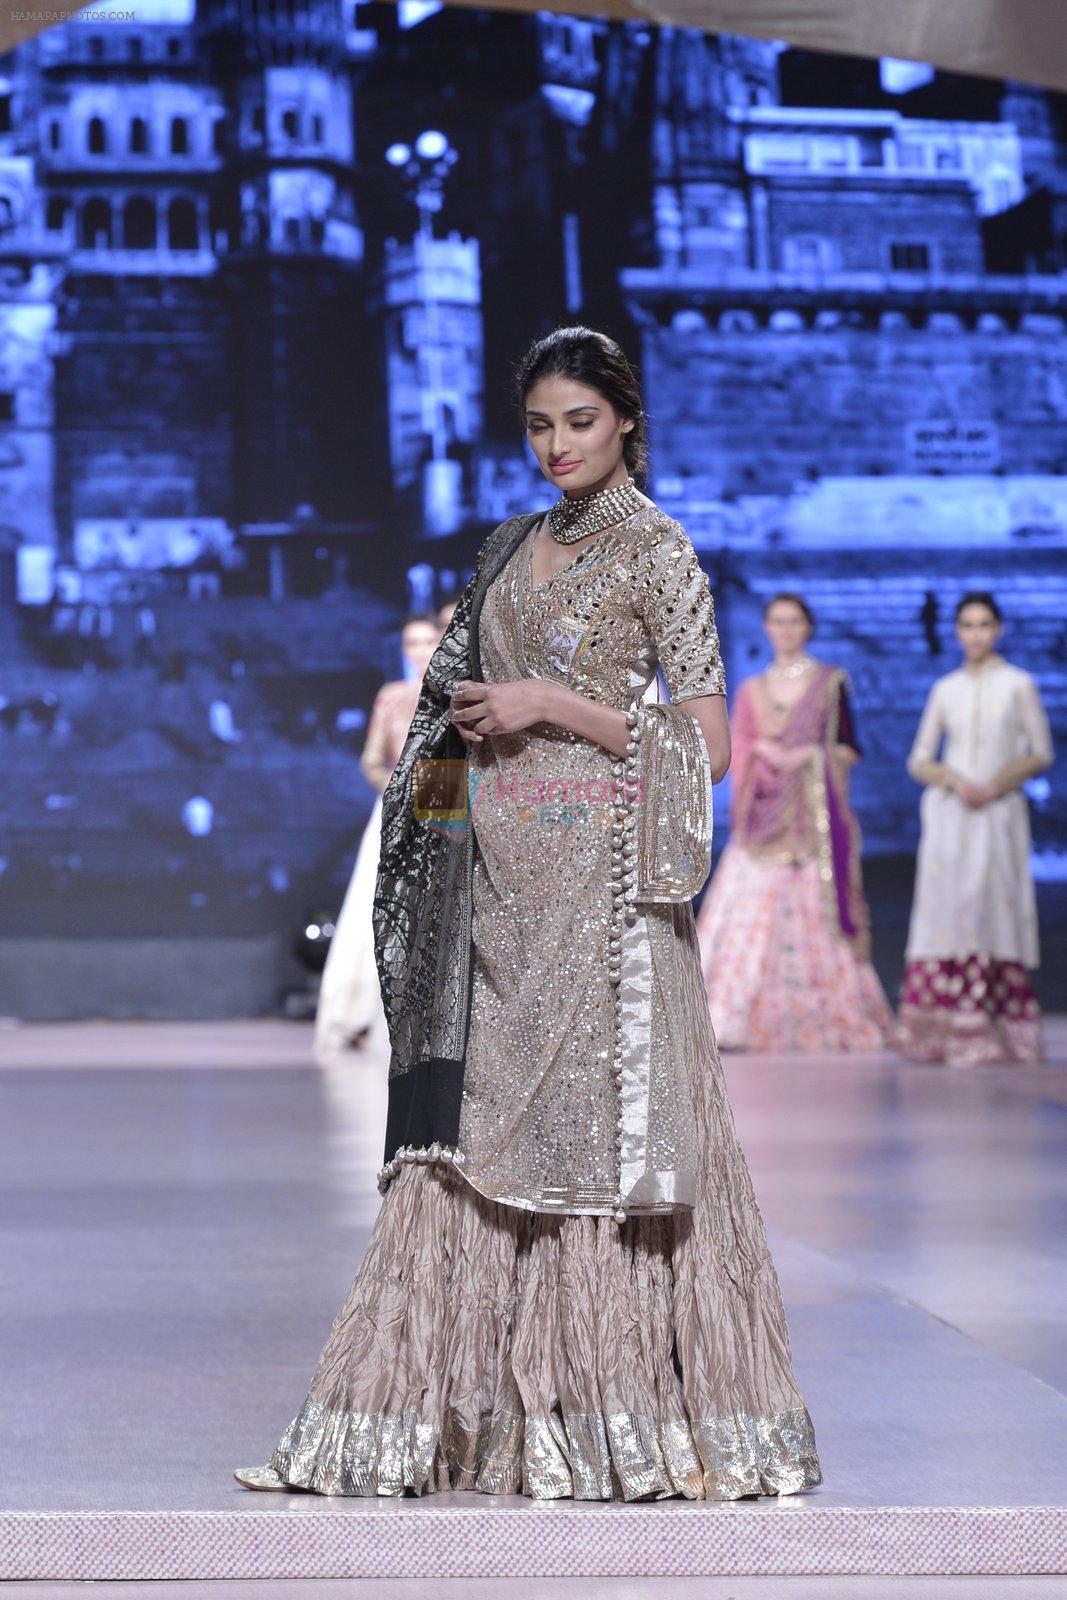 Athiya Shetty walk the ramp for Manish Malhotra's show at CPAA Fevicol SHOW on 20th March 2016